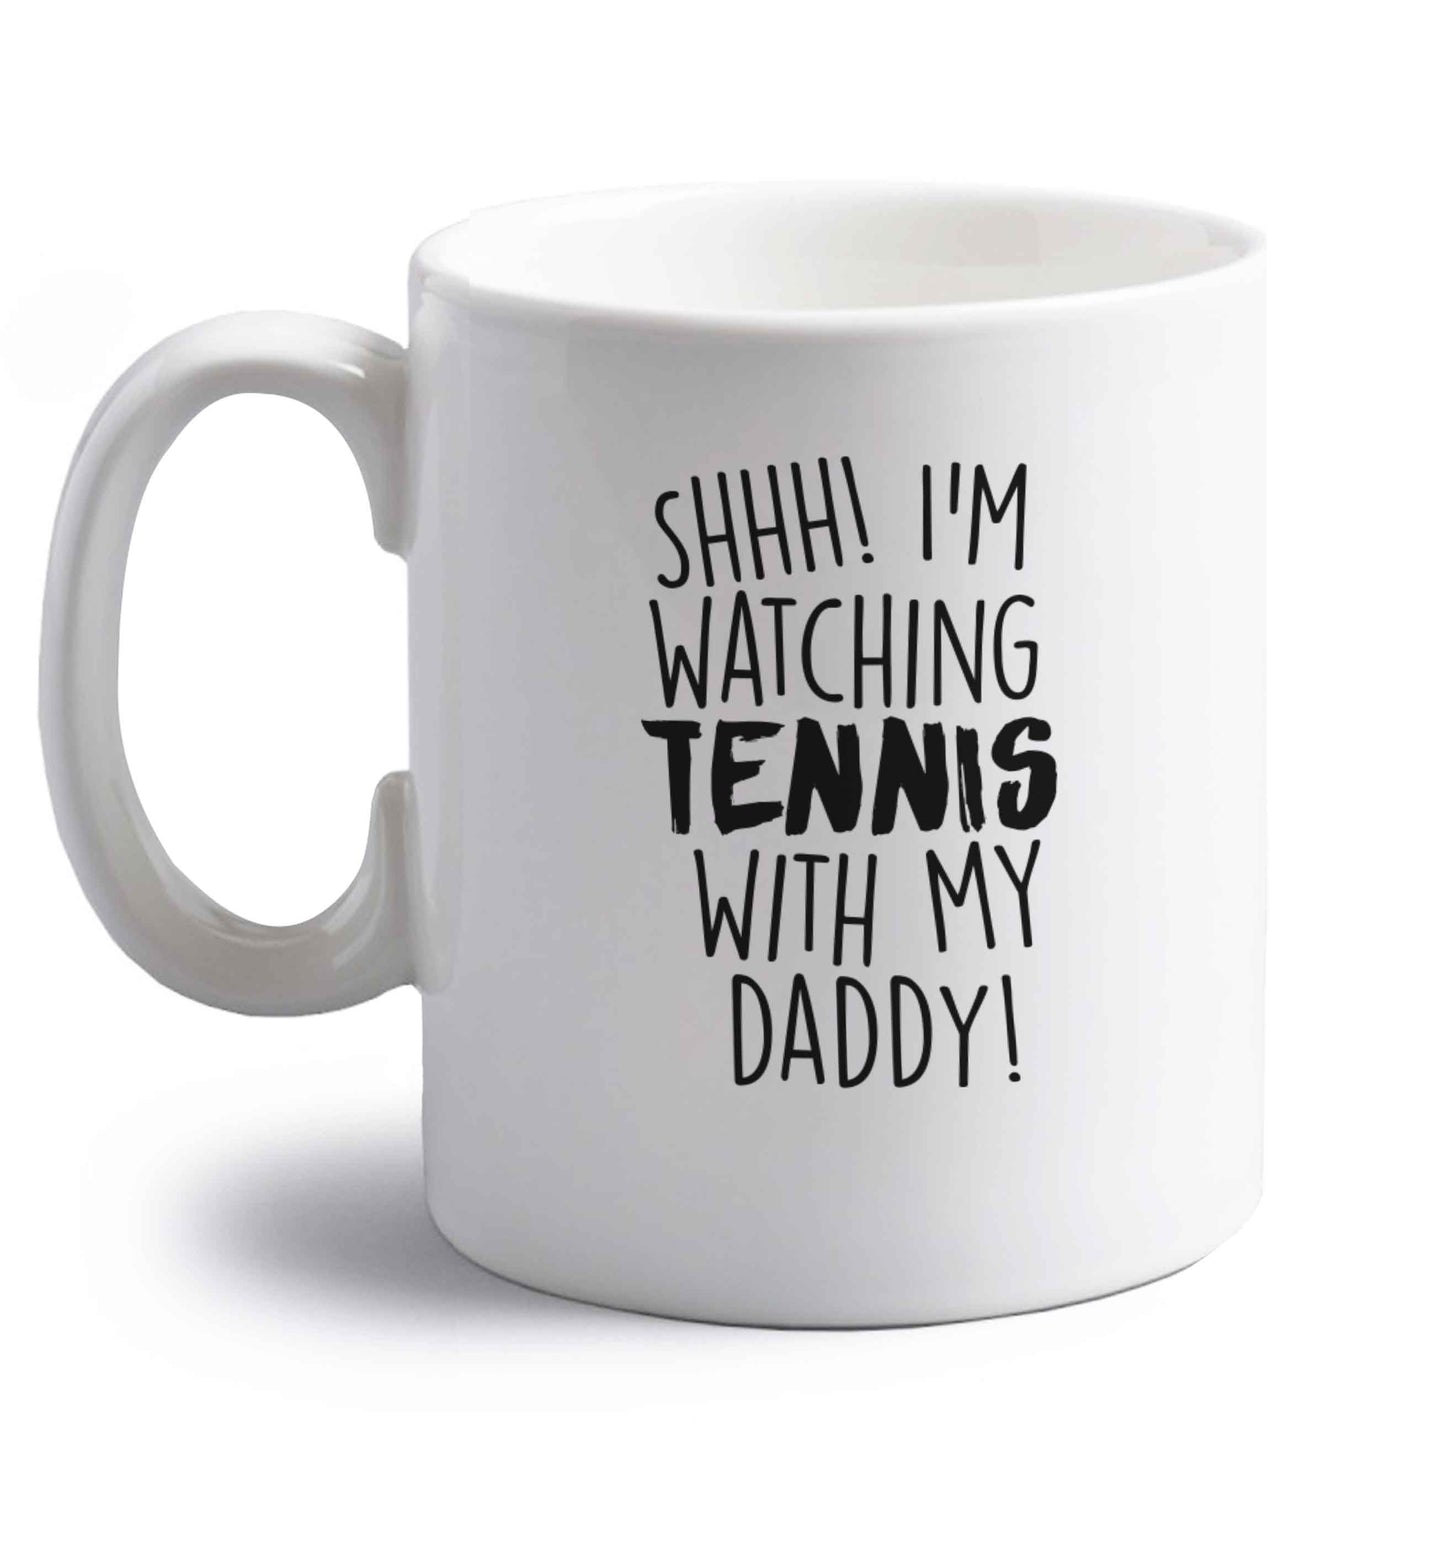 Shh! I'm watching tennis with my daddy! right handed white ceramic mug 